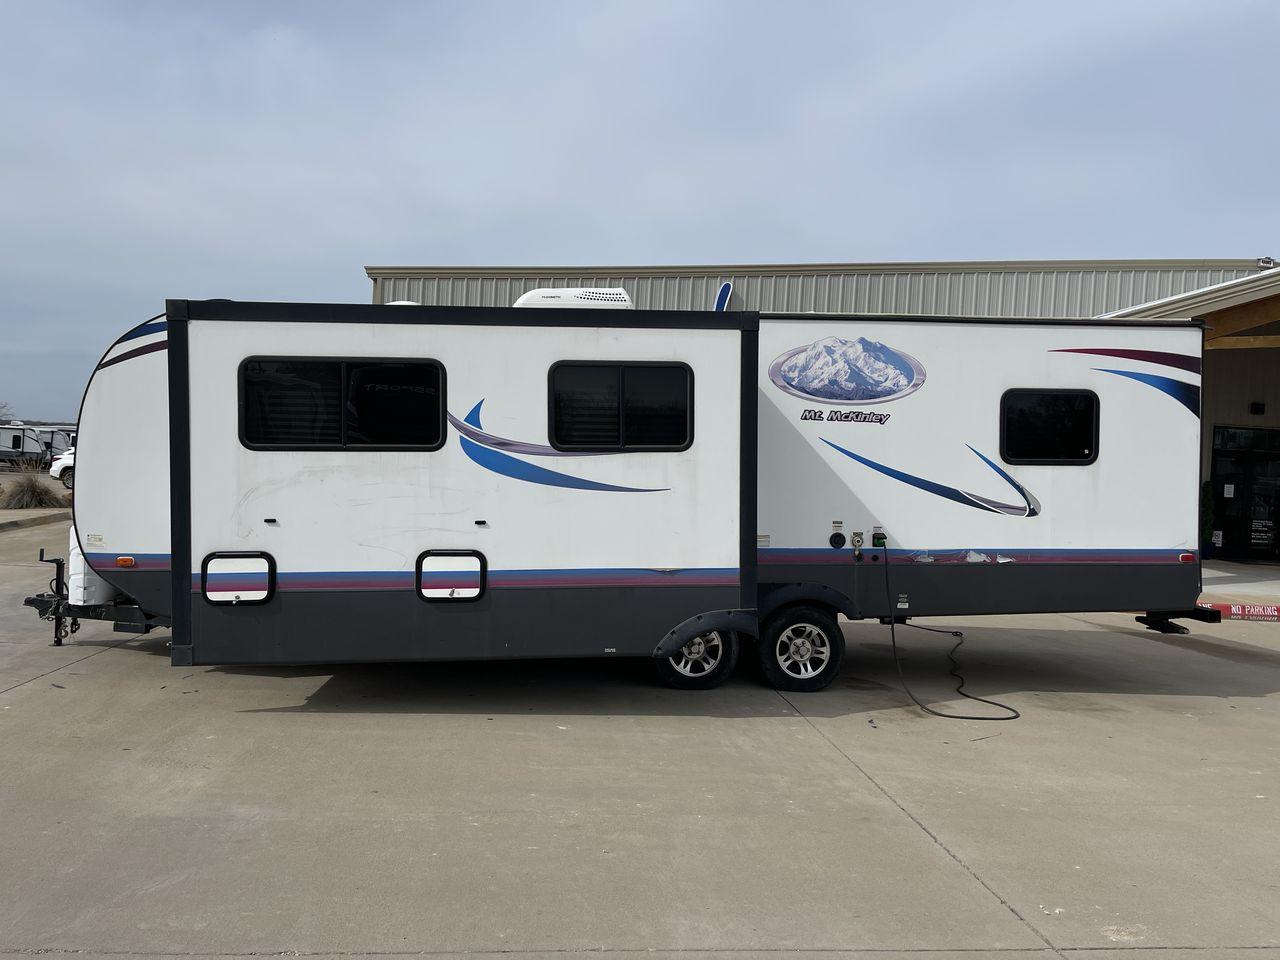 2018 WHITE MT MCKINLEY 830FK (59CCC3221JL) , Length: 32 ft | Dry Weight: 5,660 lbs. | Slides: 1 transmission, located at 4319 N Main Street, Cleburne, TX, 76033, (817) 221-0660, 32.435829, -97.384178 - Take the 2018 Mt. McKinley 830FK Travel Trailer on your upcoming journey. This travel trailer provides a well-thought-out living area for your outdoor adventures, all while being tailored for comfort and convenience. This unit measures 32 ft in length by 8 ft in width. It has a dry weight of 5,66 - Photo #21